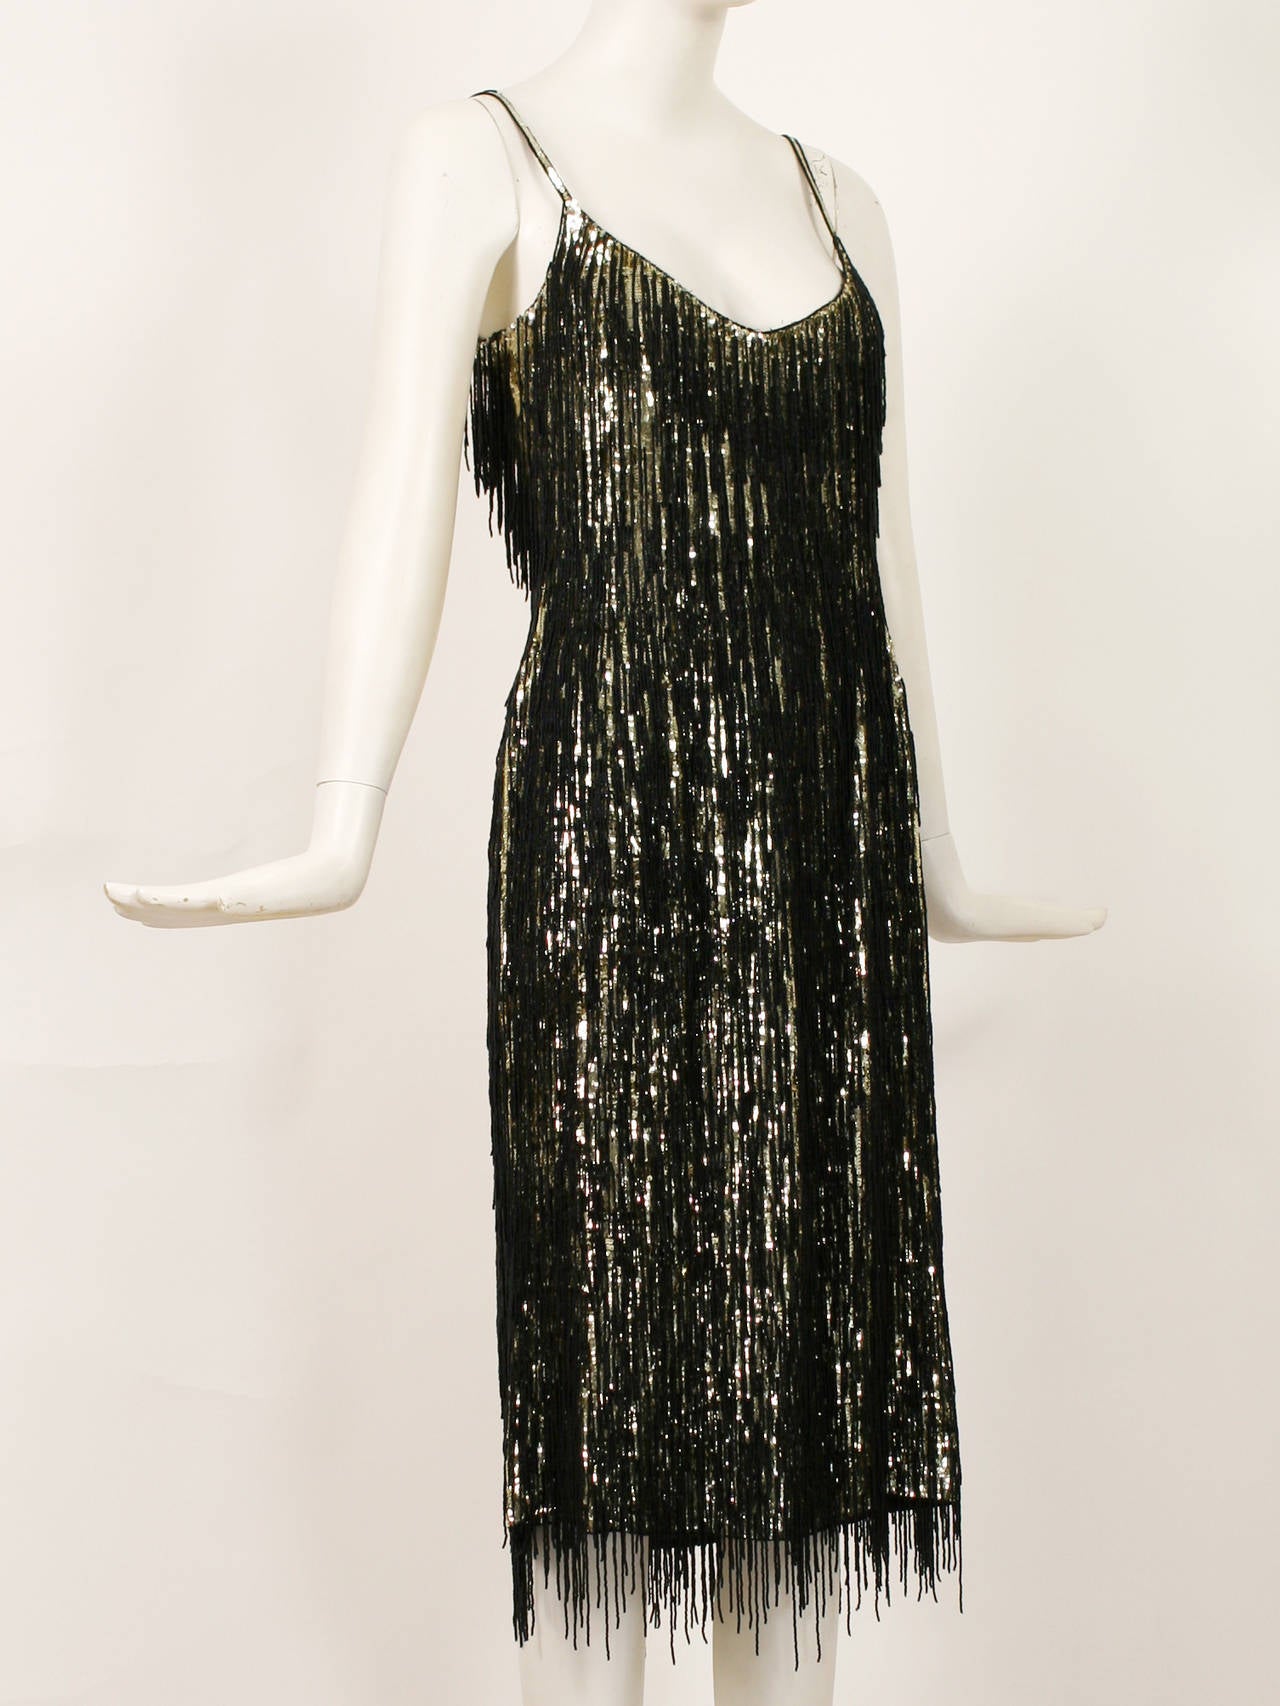 Magnificent Escada Gold and Black Beaded Fringe Cocktail Dress In Excellent Condition For Sale In New York, NY